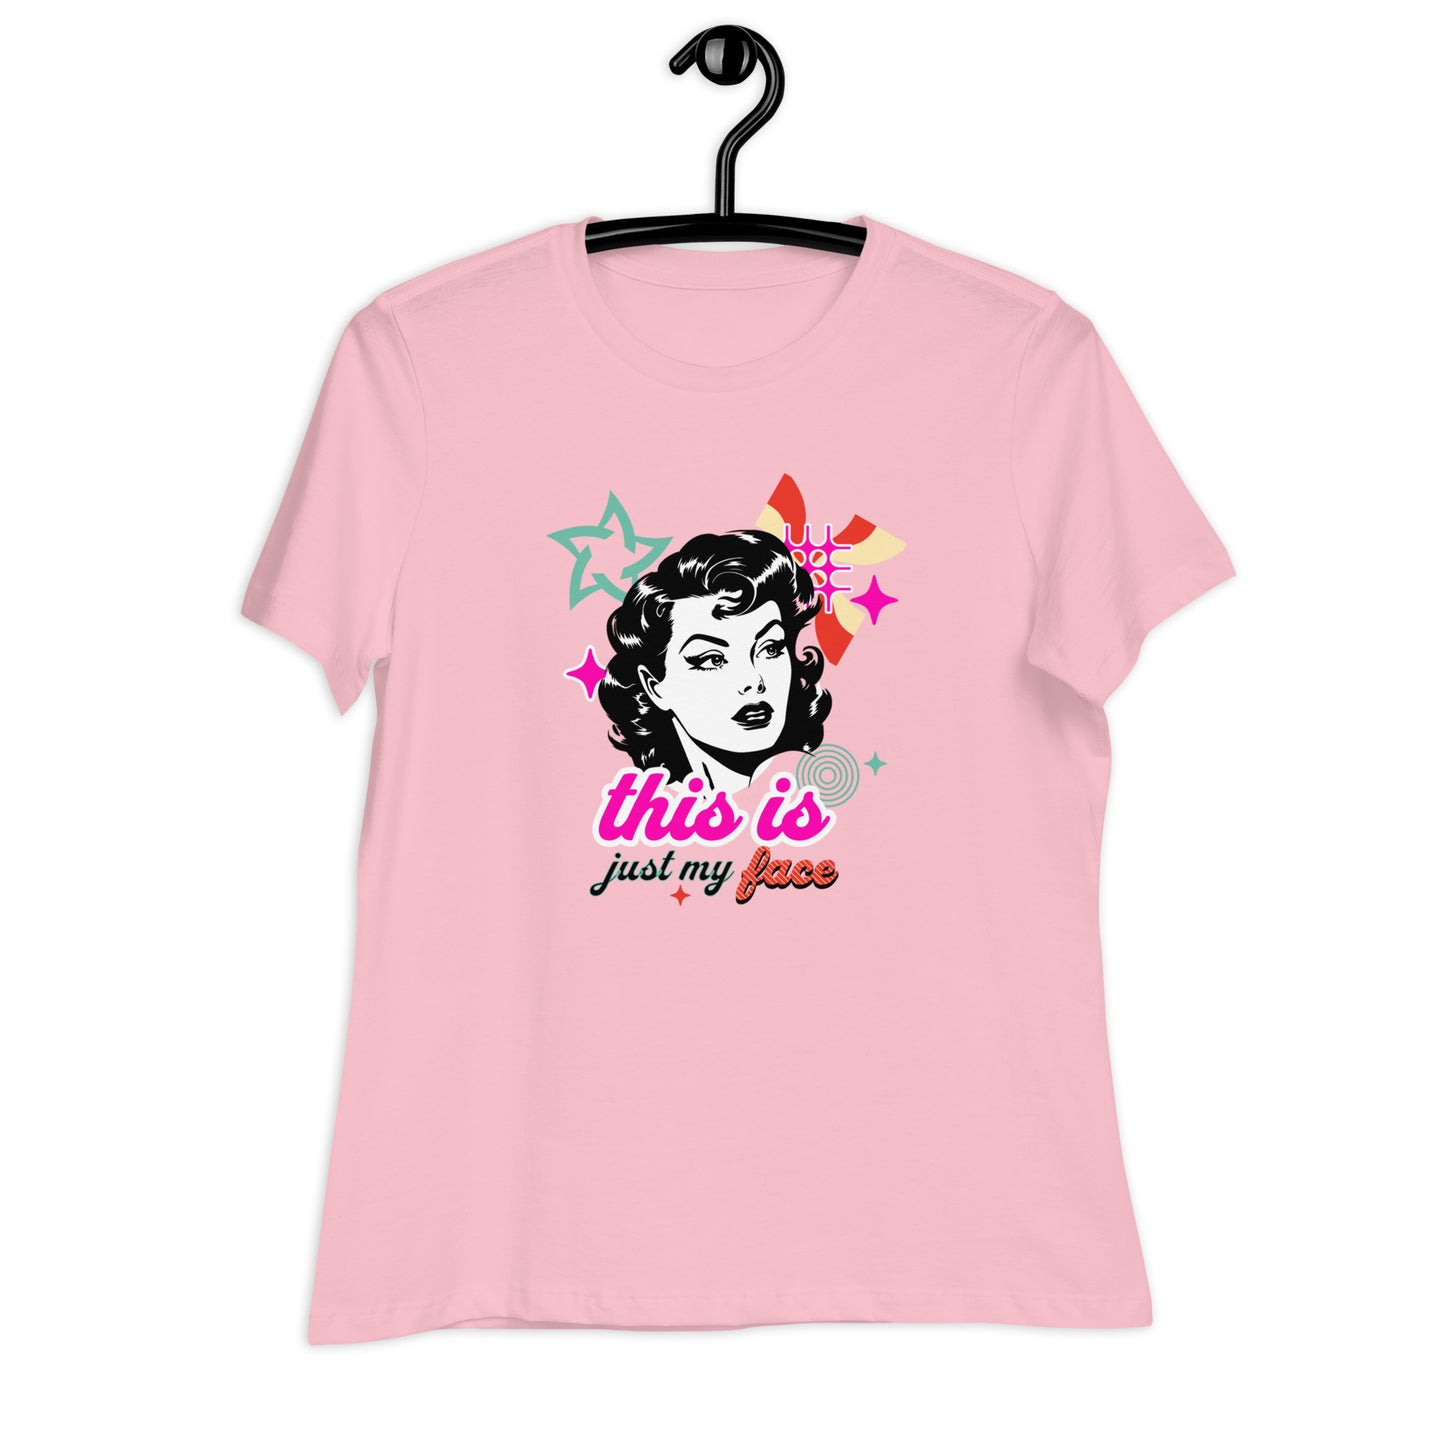 This is Just My Face - Women's Relaxed T-Shirt